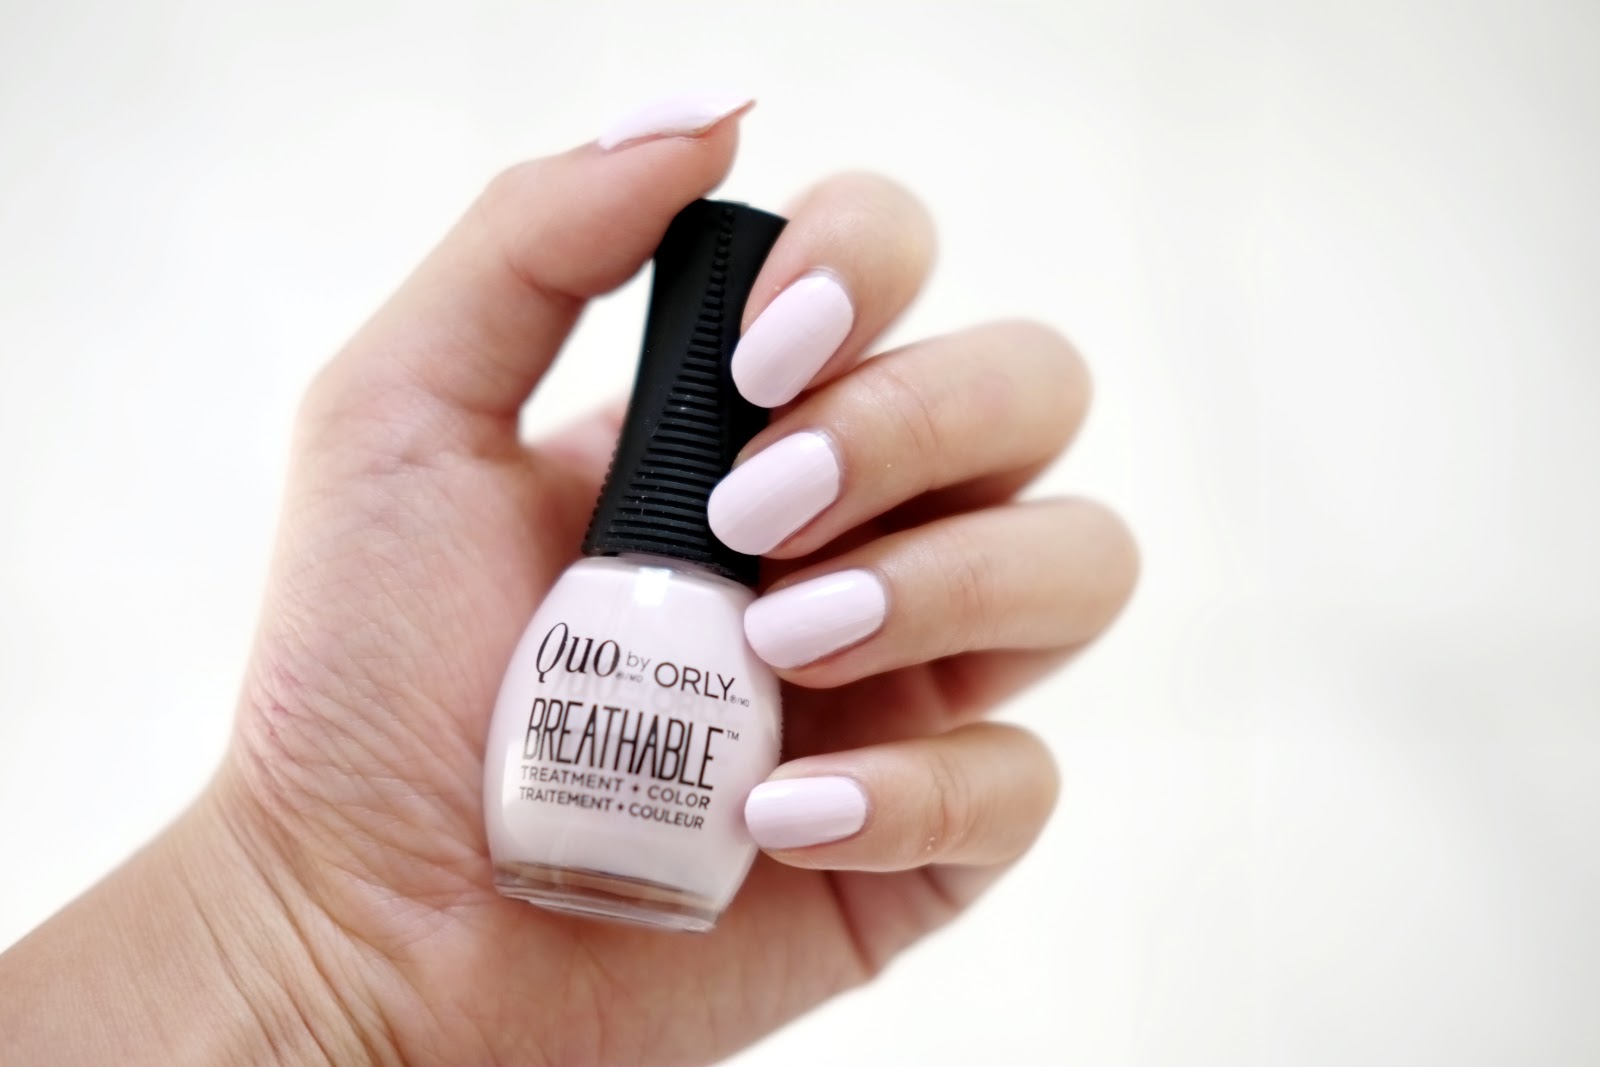 9. Orly Breathable Treatment + Color Nail Polish in "Different Color" - wide 8